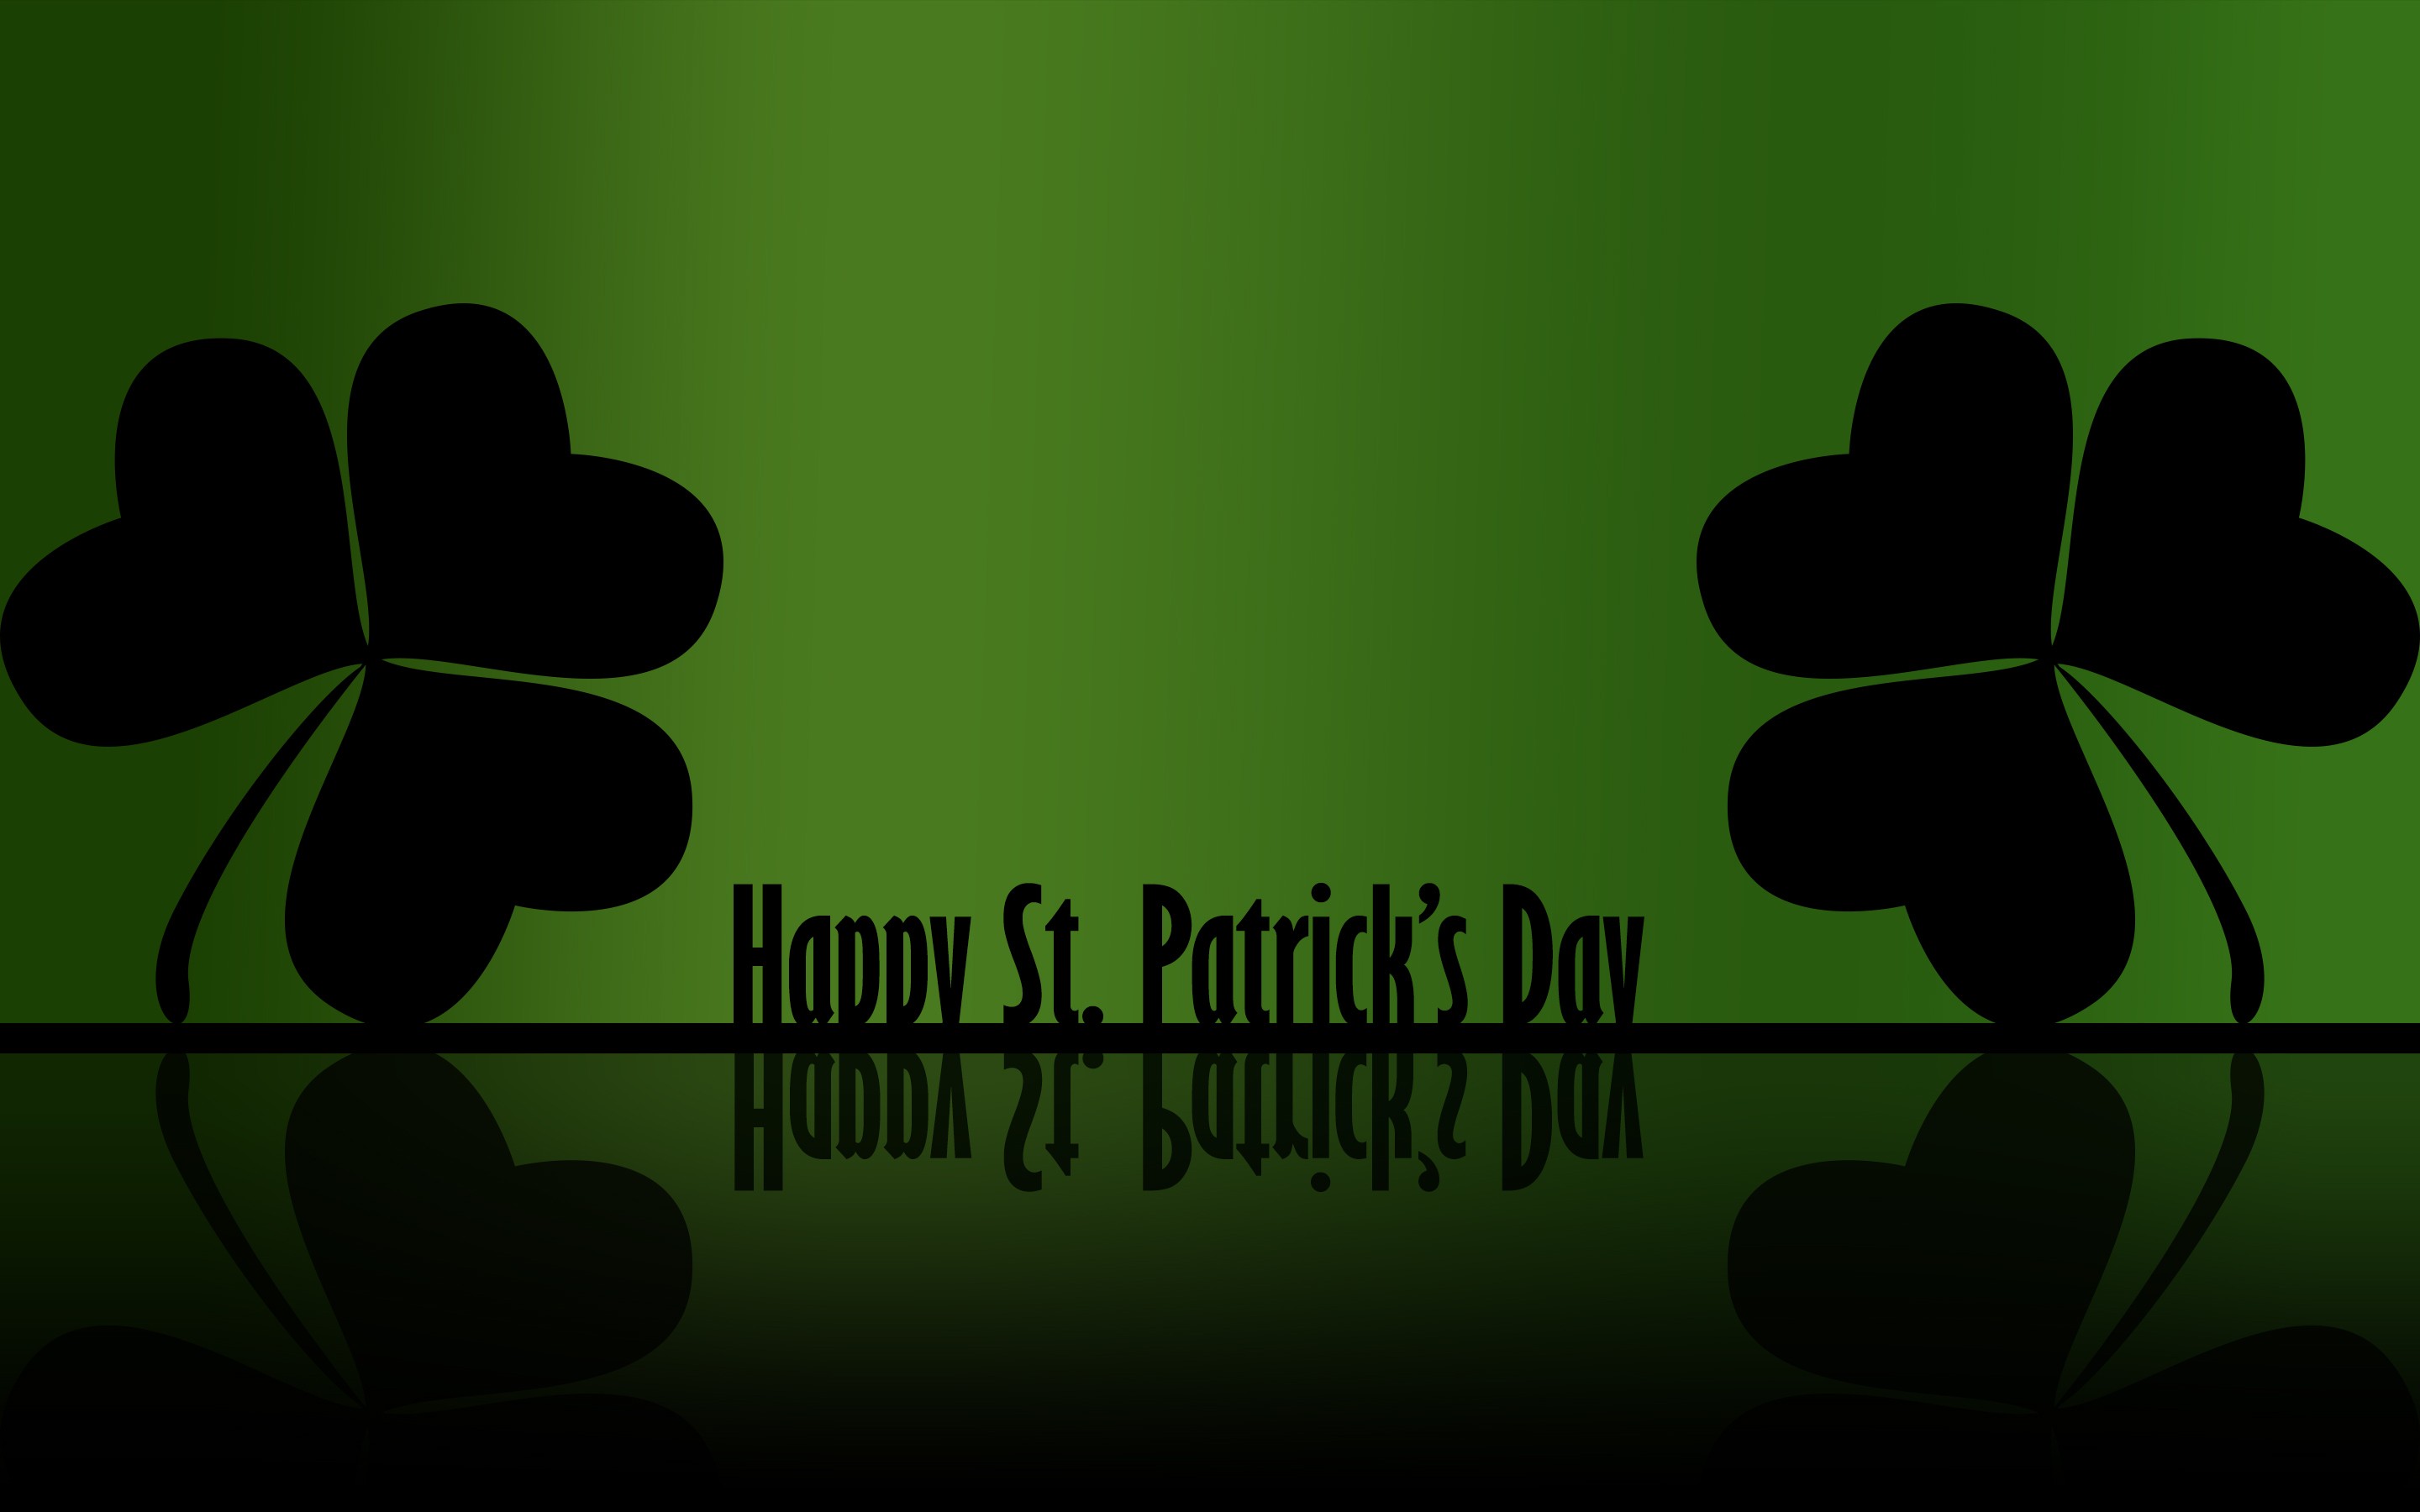 Holidays St Patrick Day Clover Shamrock Gallery for High resolution